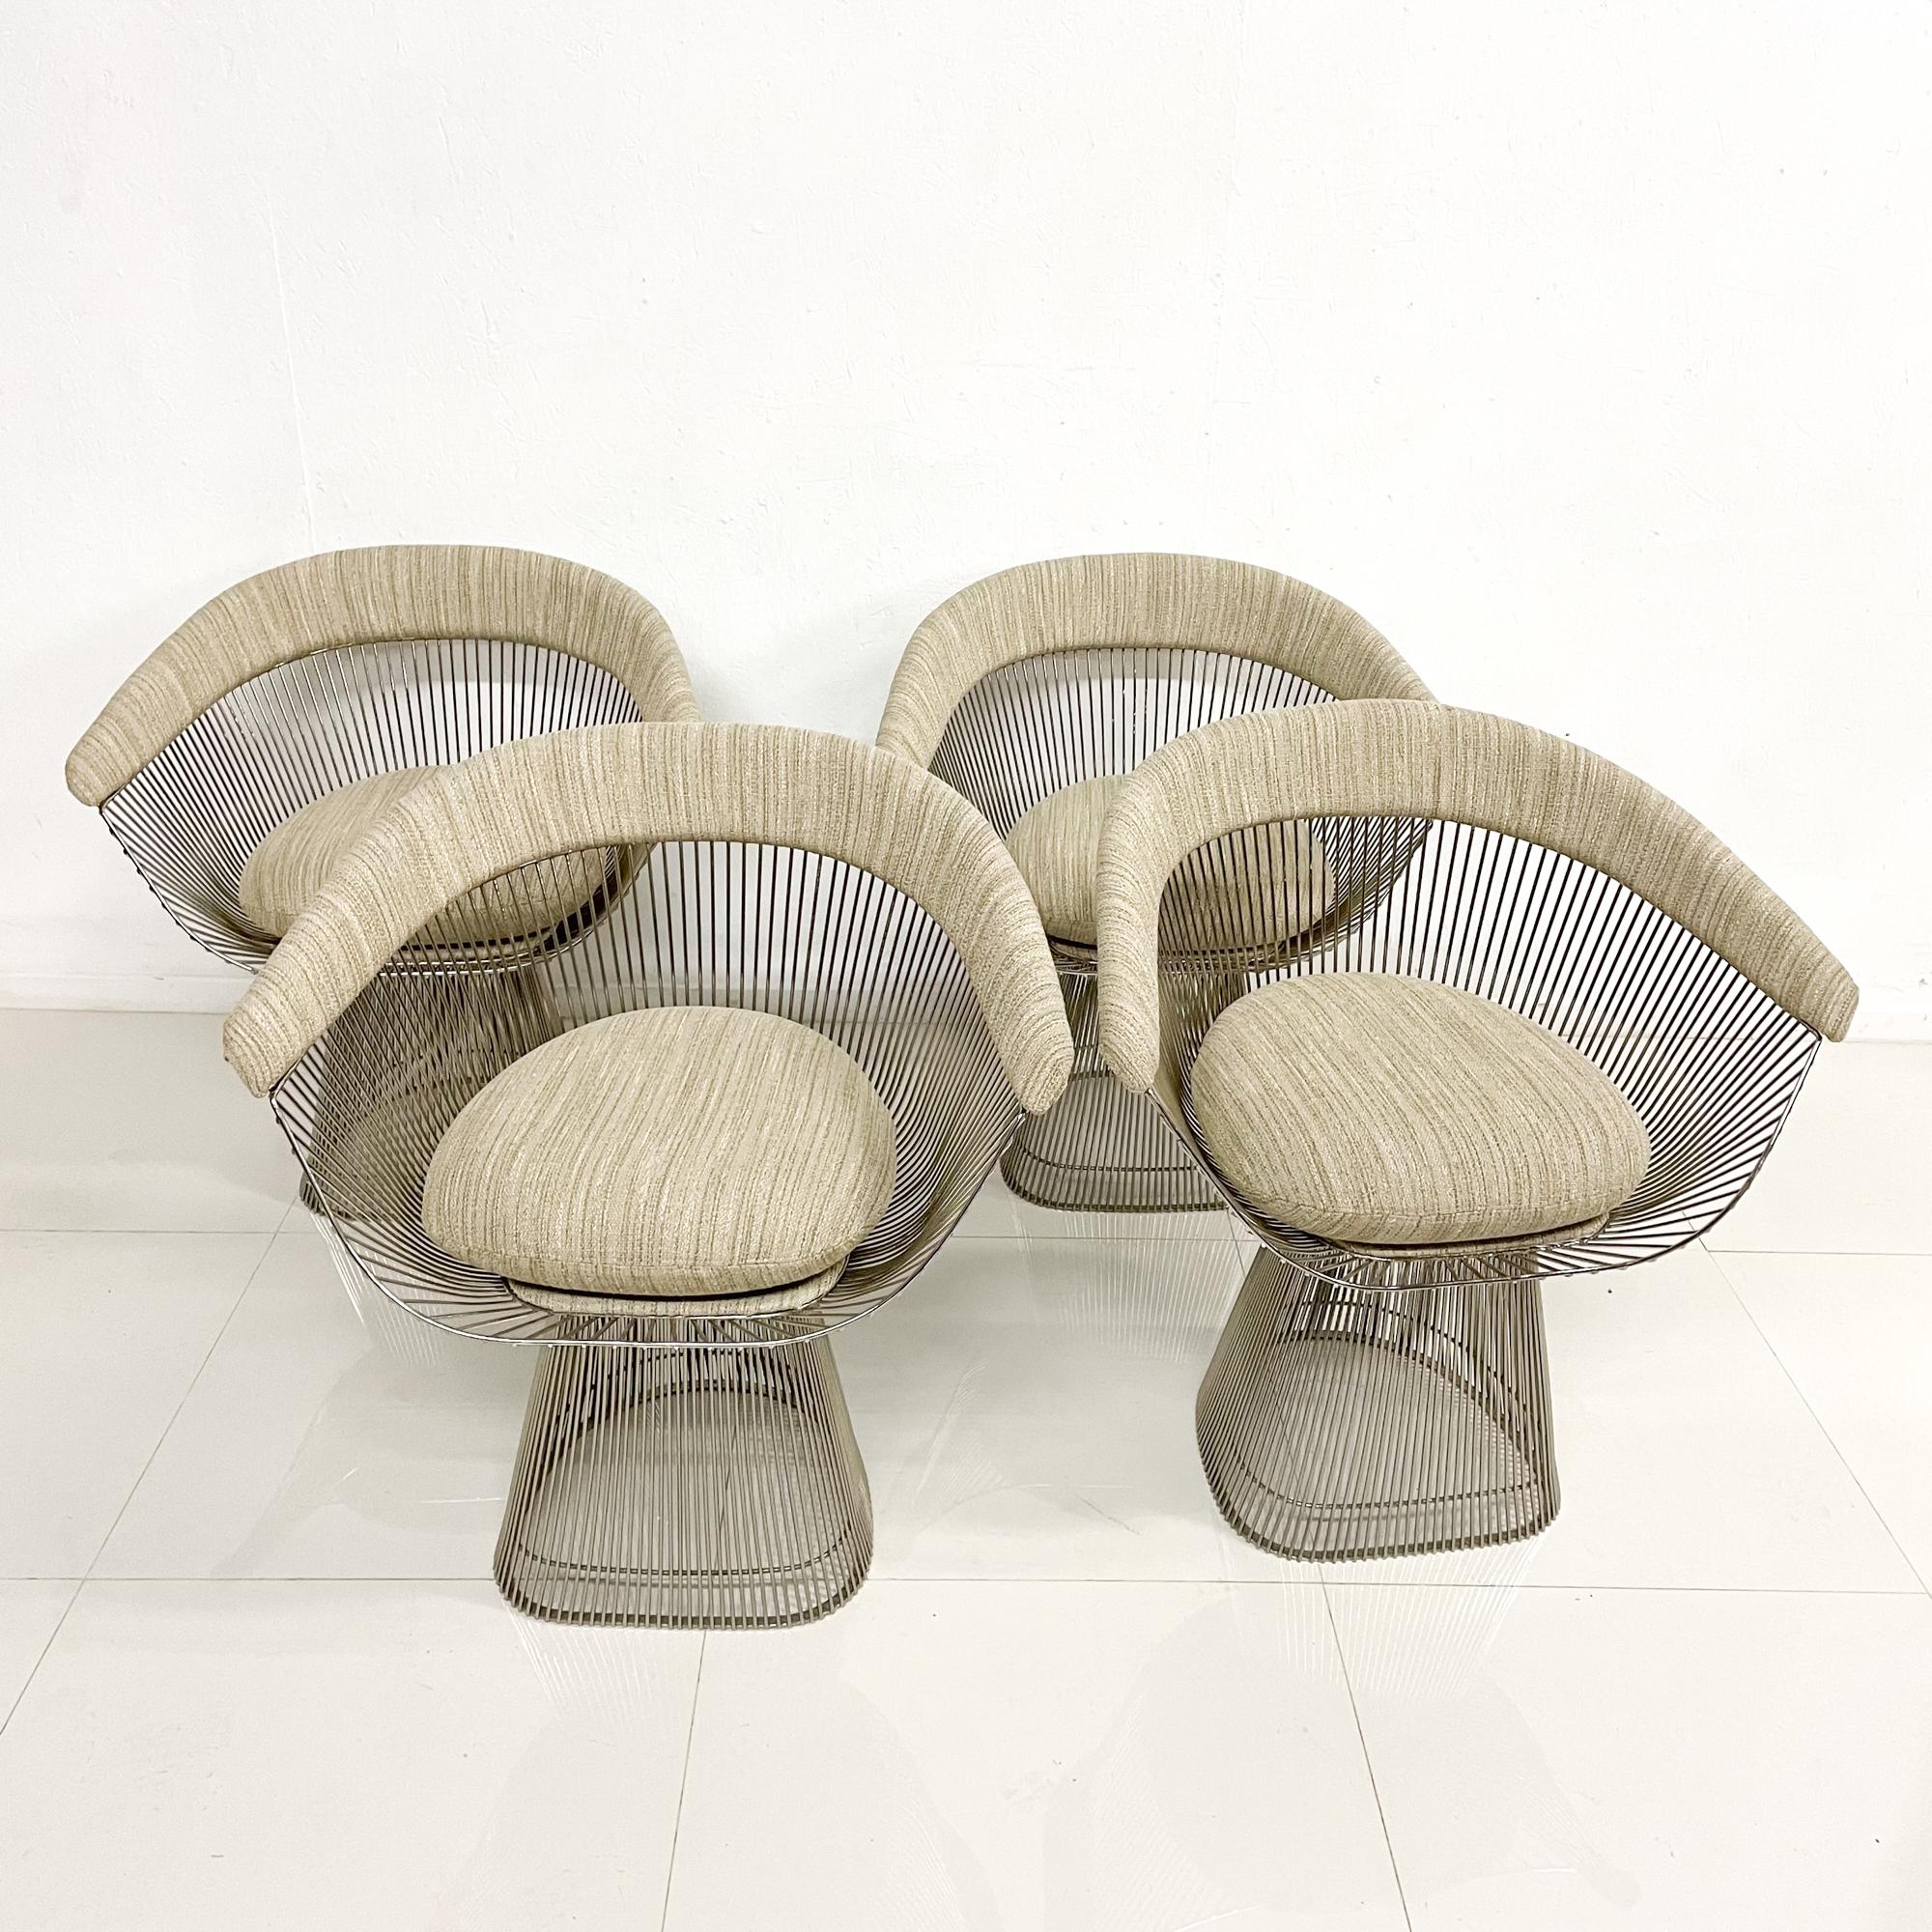 For your consideration a dining table and set of four chairs designed by Warren Platner for Knoll. Made in the USA circa the 1960s.
The set has been restored. Chairs have a new nickel plated finish with new upholstery in light tan color. All the